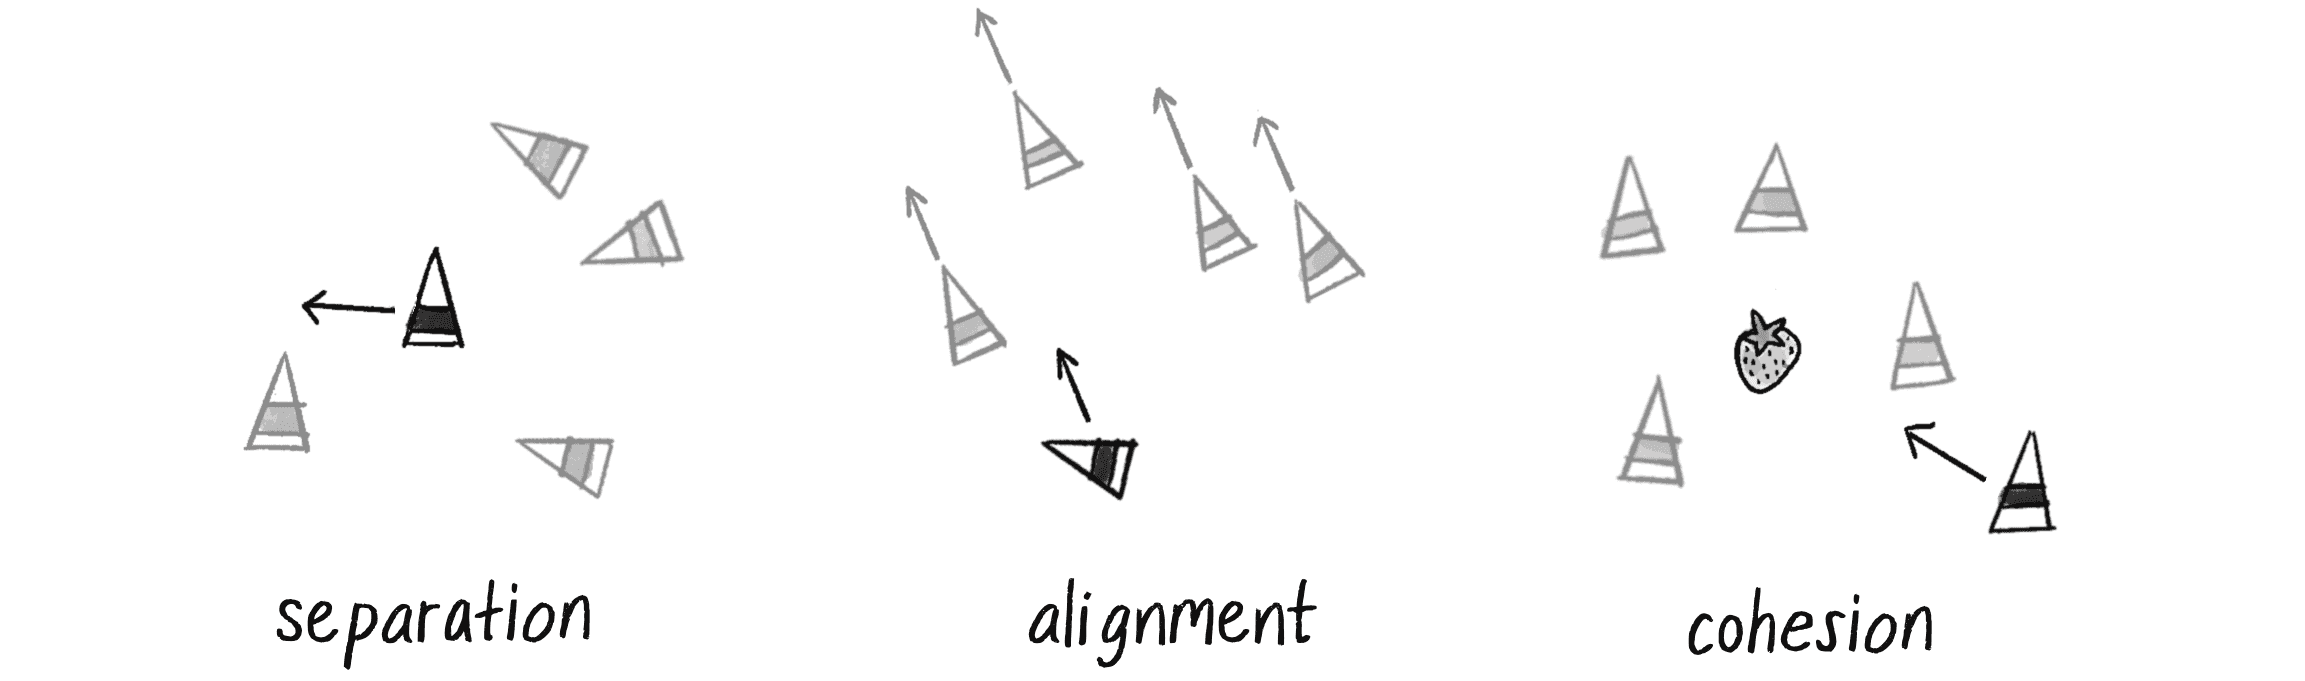 Figure 5.34: The three rules of flocking: separation, alignment, and cohesion. The example vehicle and desired velocity are bold.